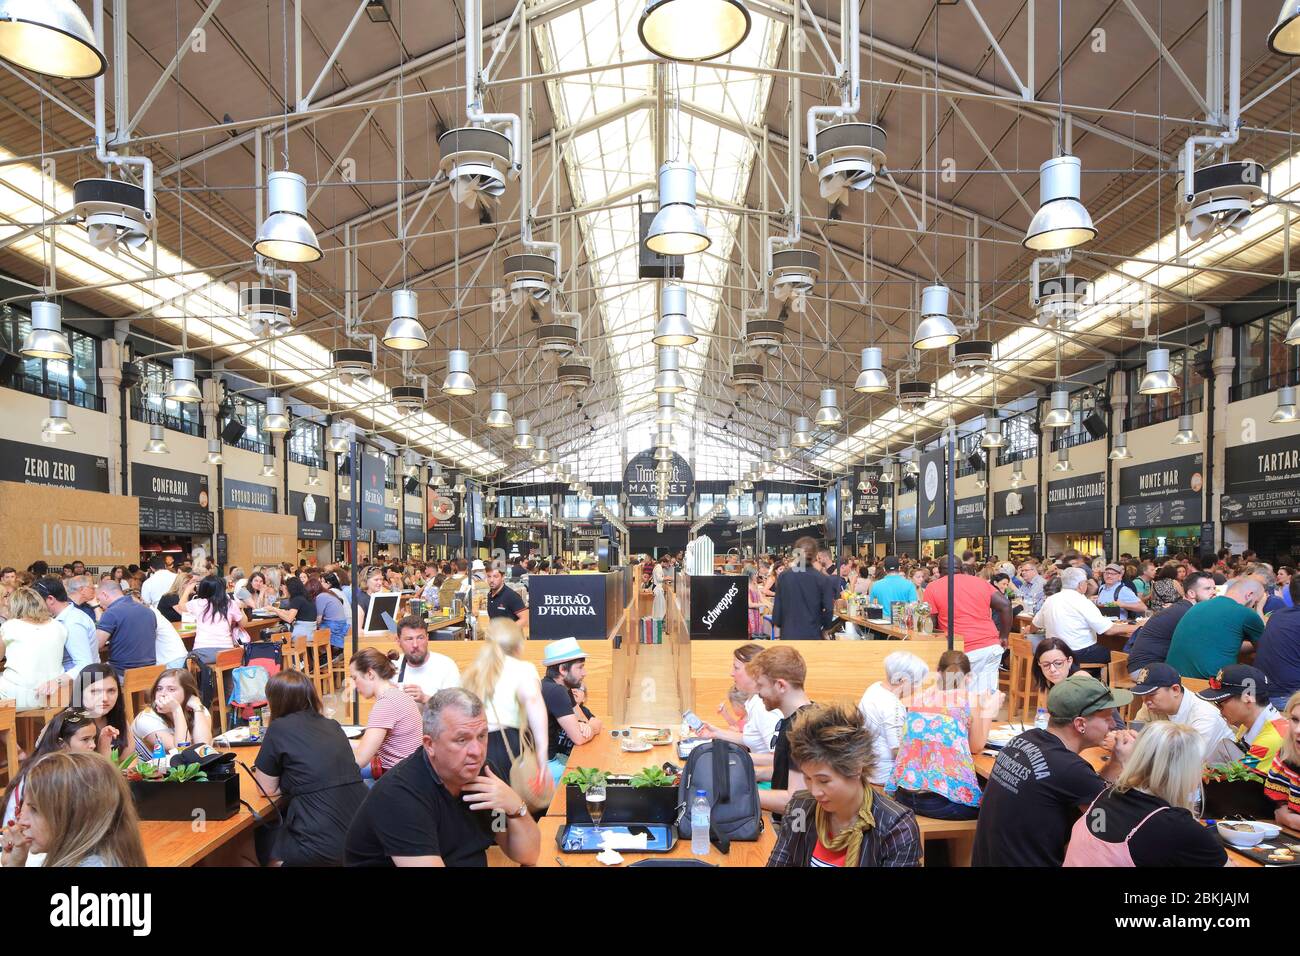 Portugal, Lisbon, Cais do Sodre, Mercado da Ribeira, Time Out Market, food hall opened in 2014 with 35 kiosks serving various culinary specialties Stock Photo